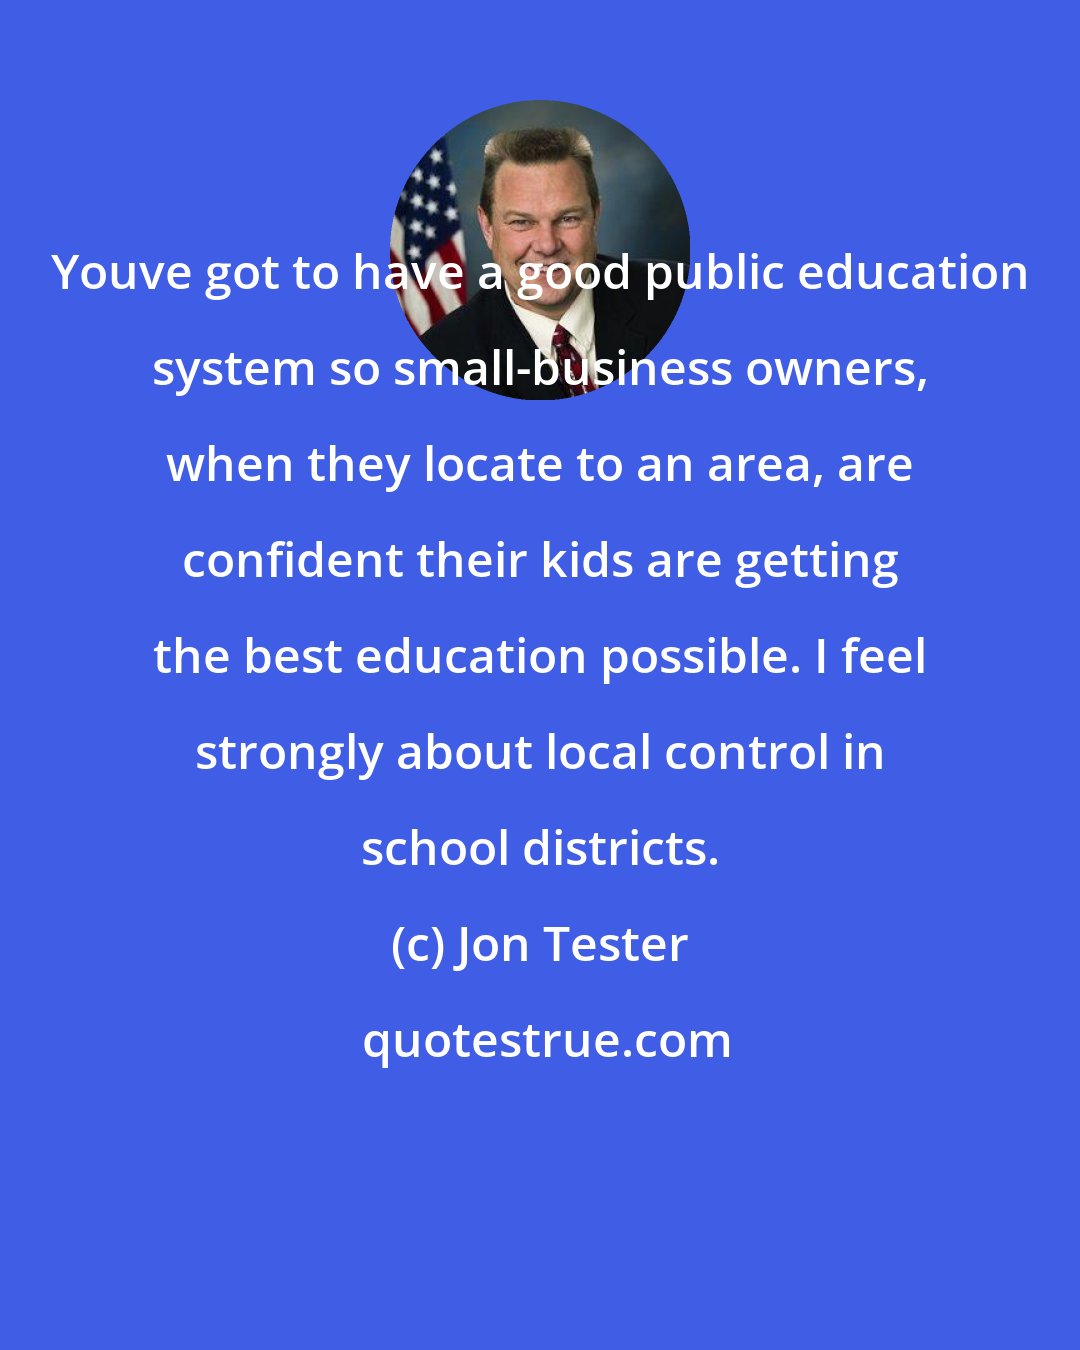 Jon Tester: Youve got to have a good public education system so small-business owners, when they locate to an area, are confident their kids are getting the best education possible. I feel strongly about local control in school districts.